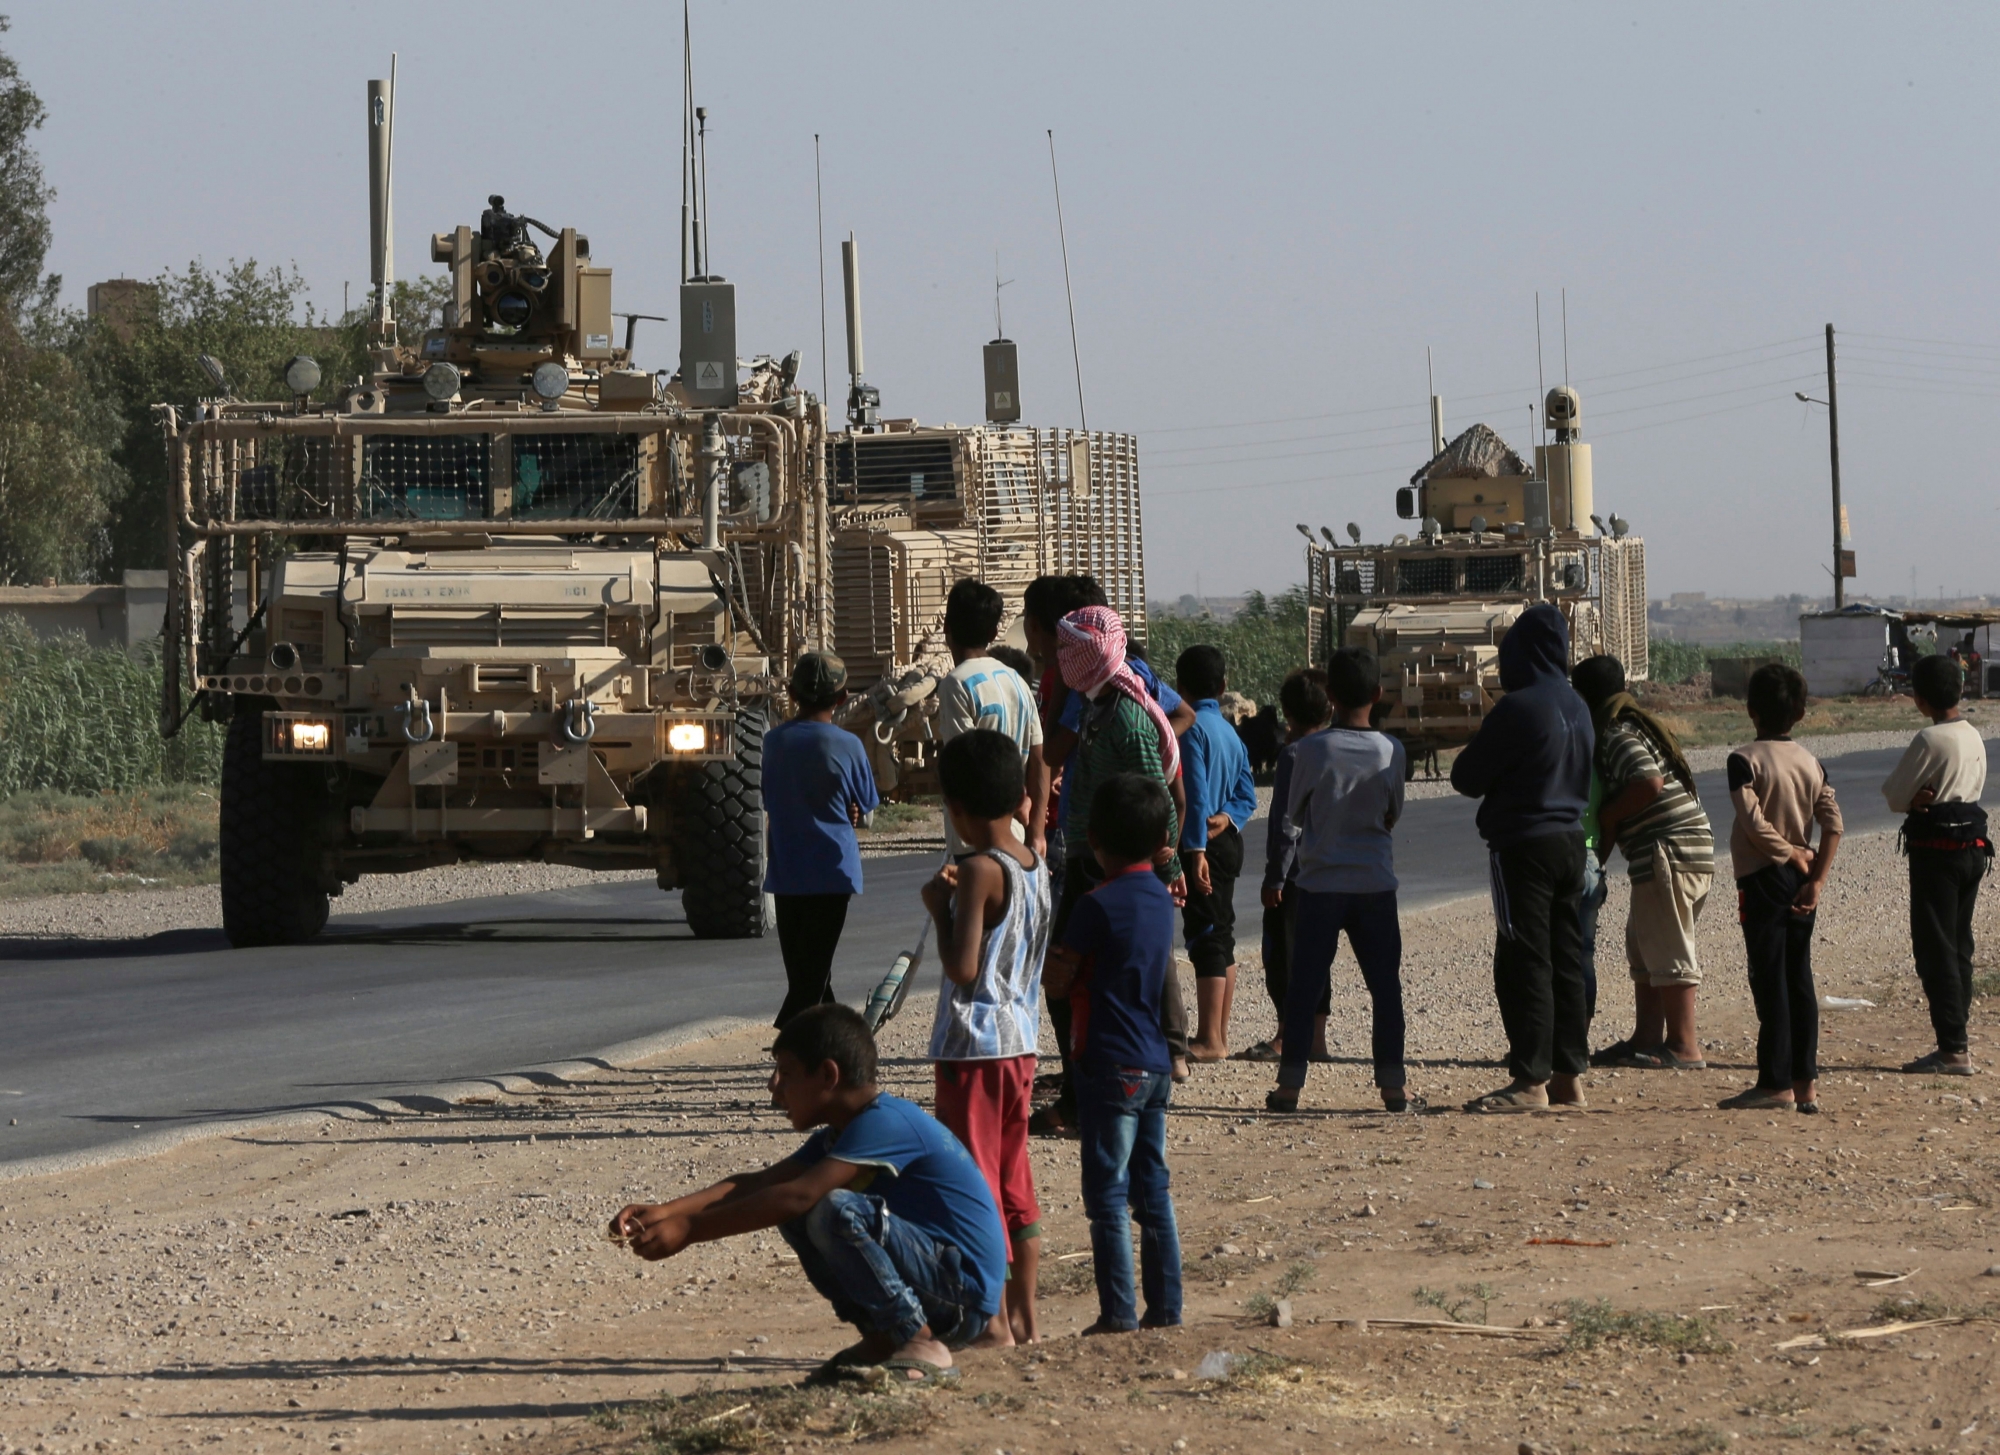 FILE - In this July 26, 2017, file photo, Syrians look at a U.S. armored vehicle convoy on a road that leads to Raqqa, northeast Syria. With Islamic State's near total defeat on the battle field, the extremist group has reverted to what it was before its spectacular series of conquests in 2014 _ a shadowy terror network that targets vulnerable civilian populations and exploits state weaknesses to incite on sectarian strife. But a recent surge in false claims of responsibility for attacks also signals that the group is struggling to stay relevant after losing its proto-state and its dominance of the international news agenda. (AP Photo/Hussein Malla, File) Islamic State